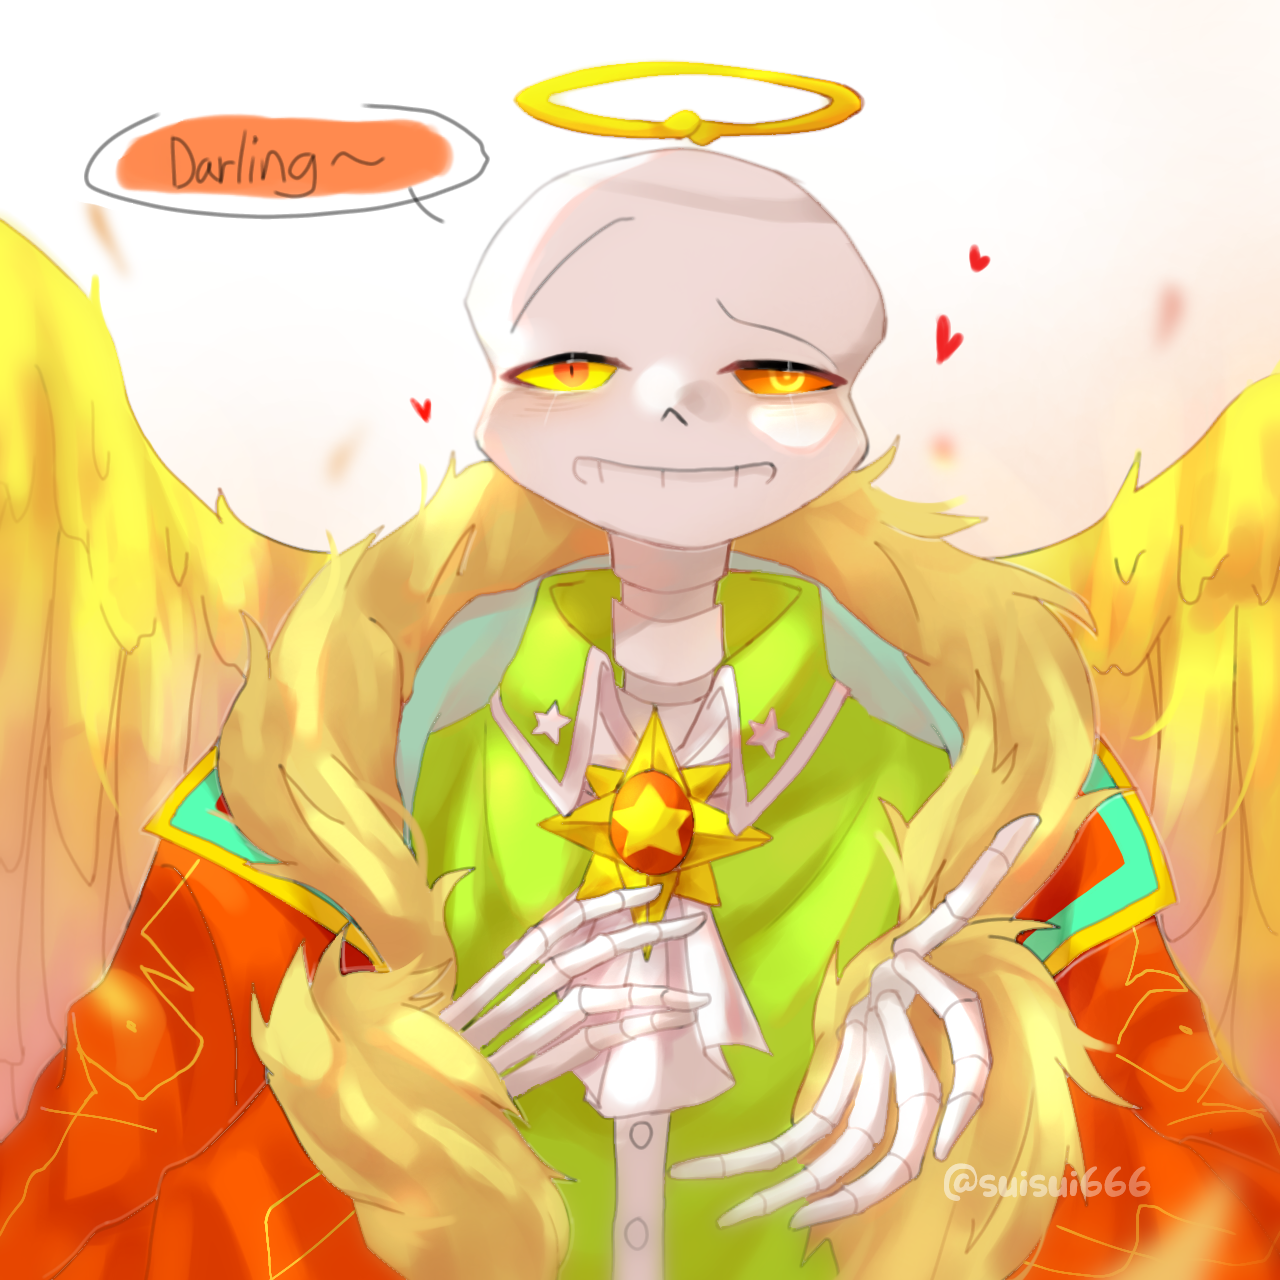 Pin by Sunny on undertale aus  Dream sans, Undertale, Dreams and nightmares